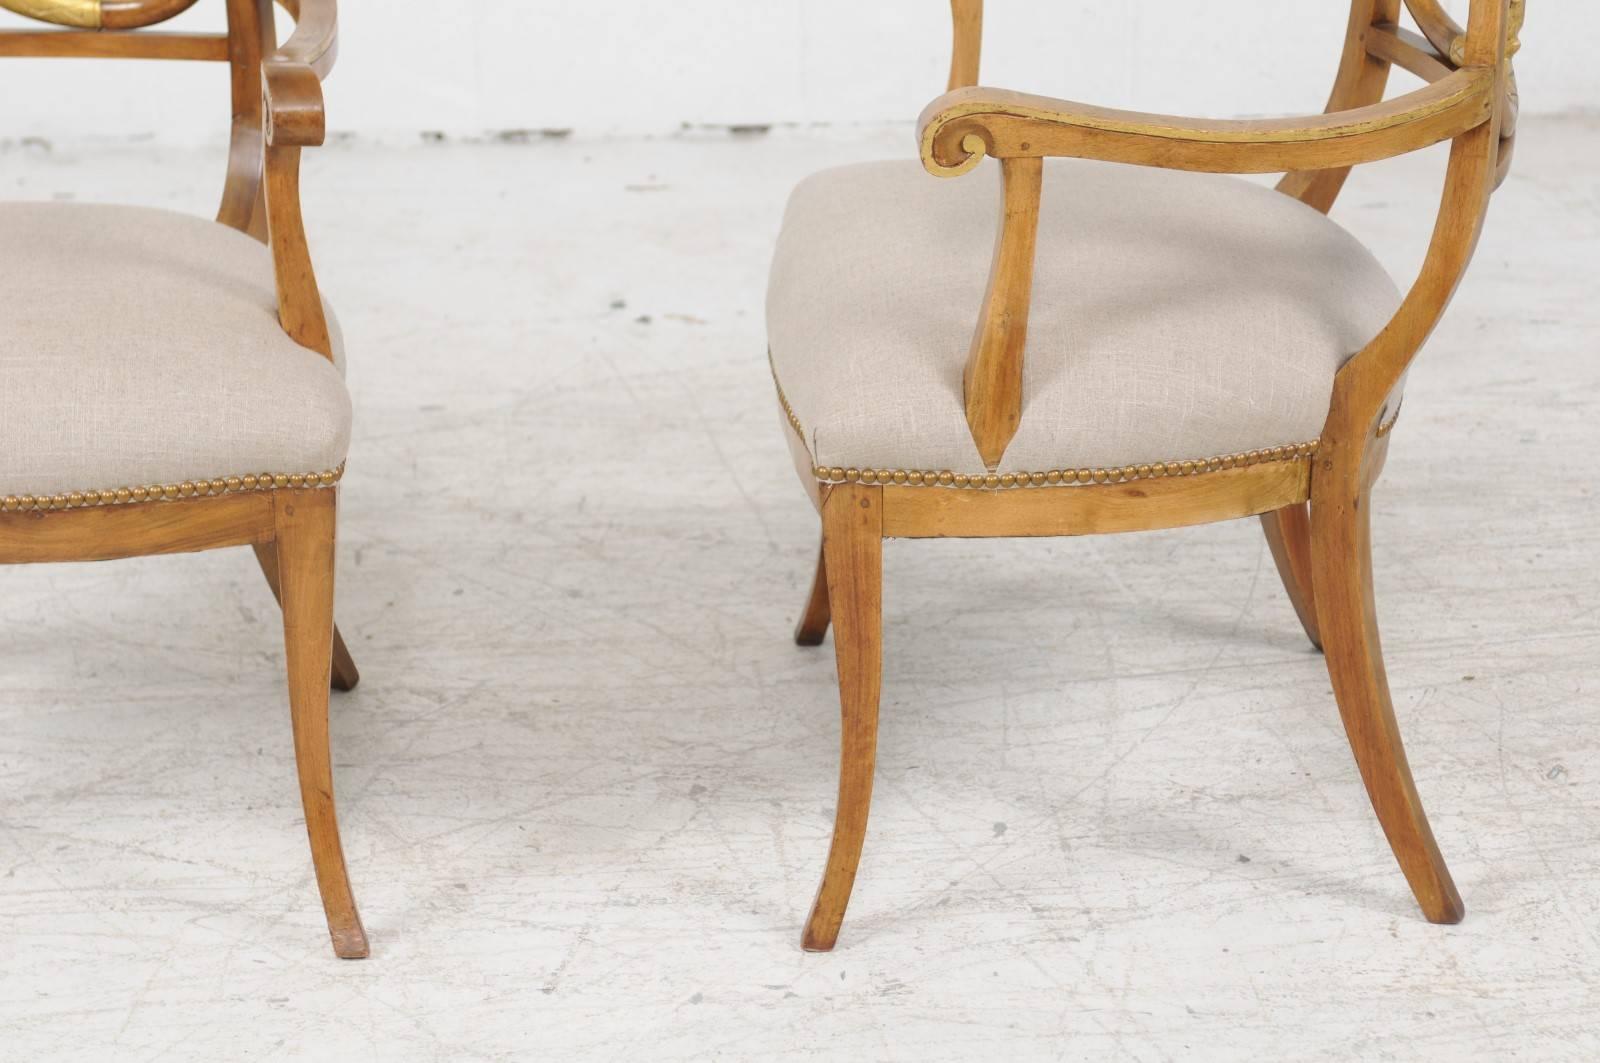 Upholstery Pair of Italian 1860s Parcel-Gilt Walnut Upholstered Chairs with Serpent Motifs